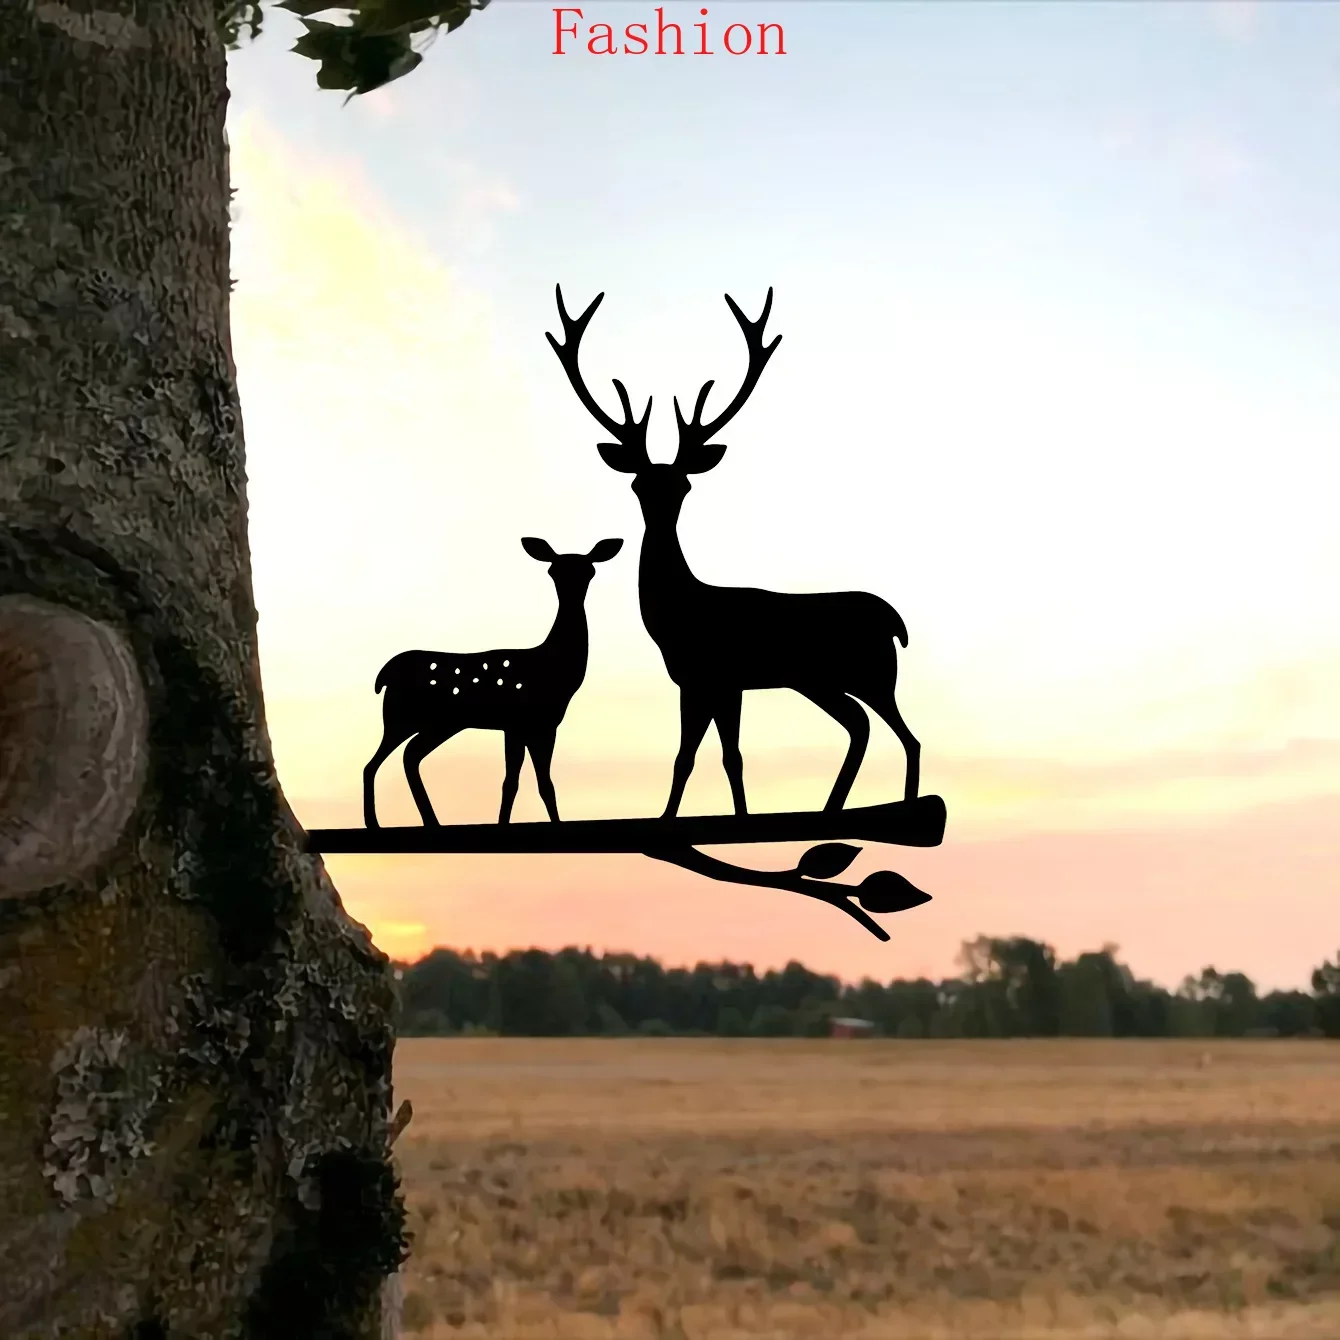 

Two Deers on Branch Iron Art Silhouette Metal Home Decor Garden Yard Patio Outdoor Statue Stake Decoration Christmas Decoration